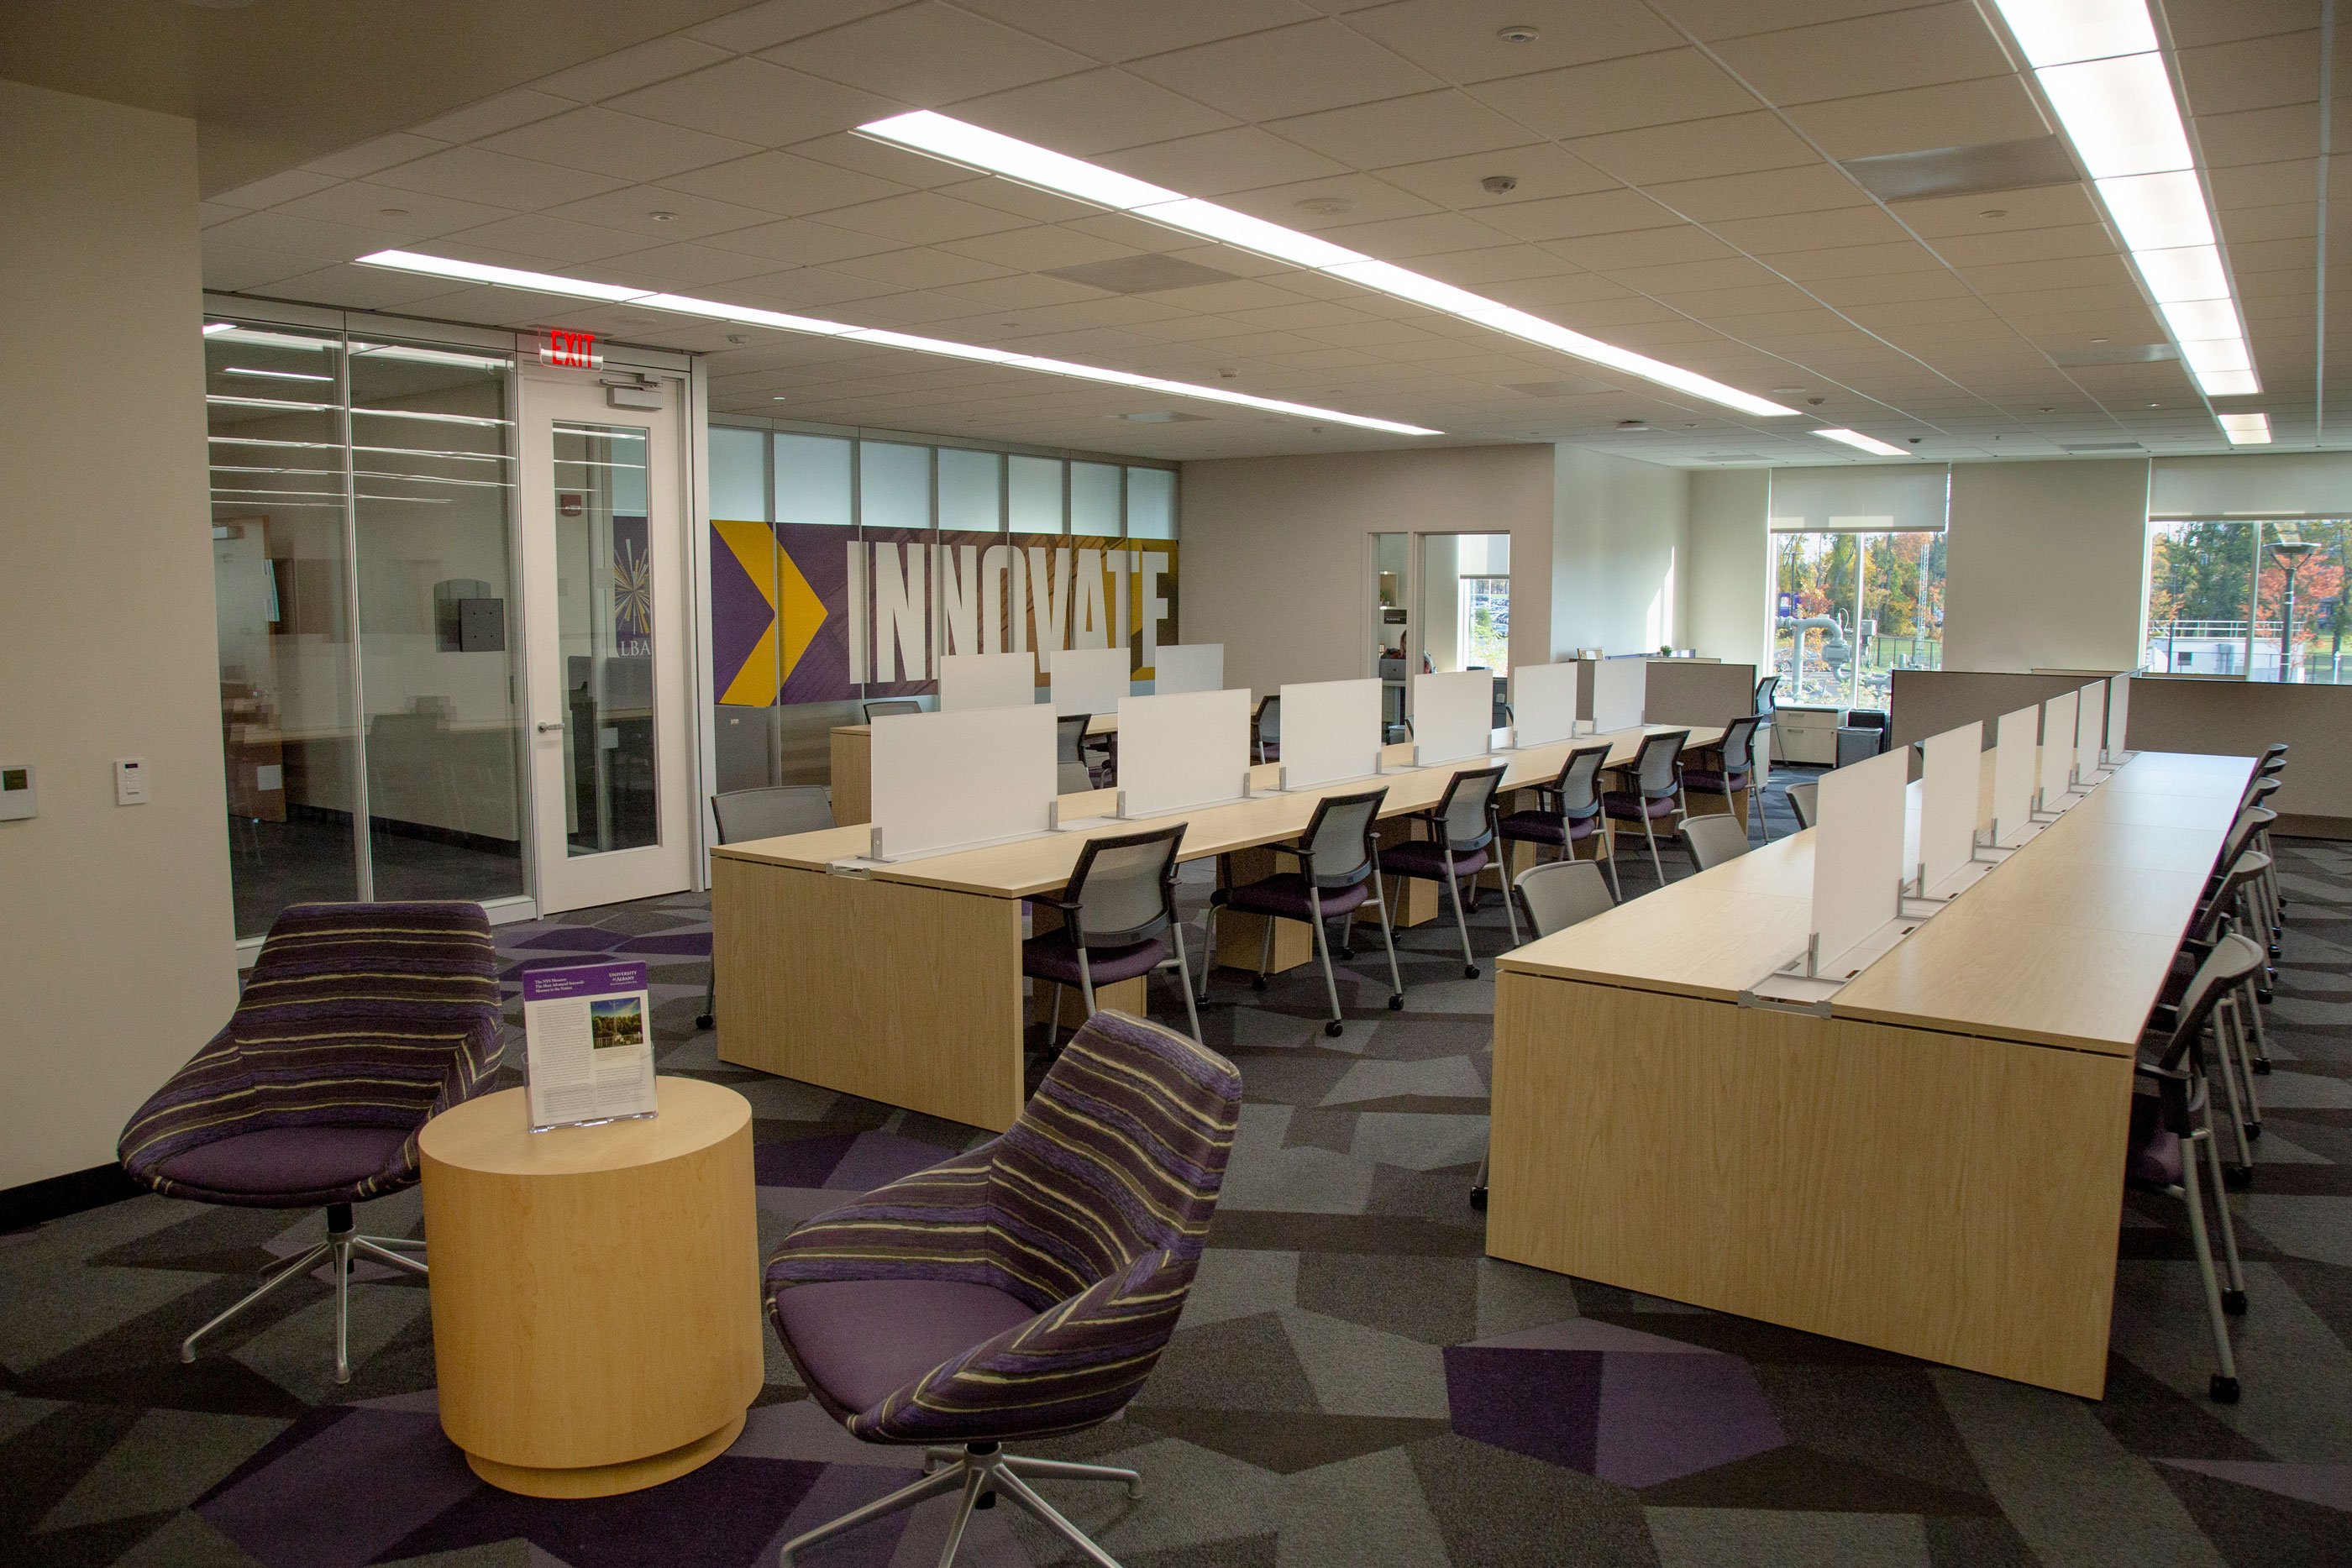 The inside of the UAlbany Innovation Center, with two purple chairs around a coffee table and about 40 shared workstations situated in front of the Innovate sign.